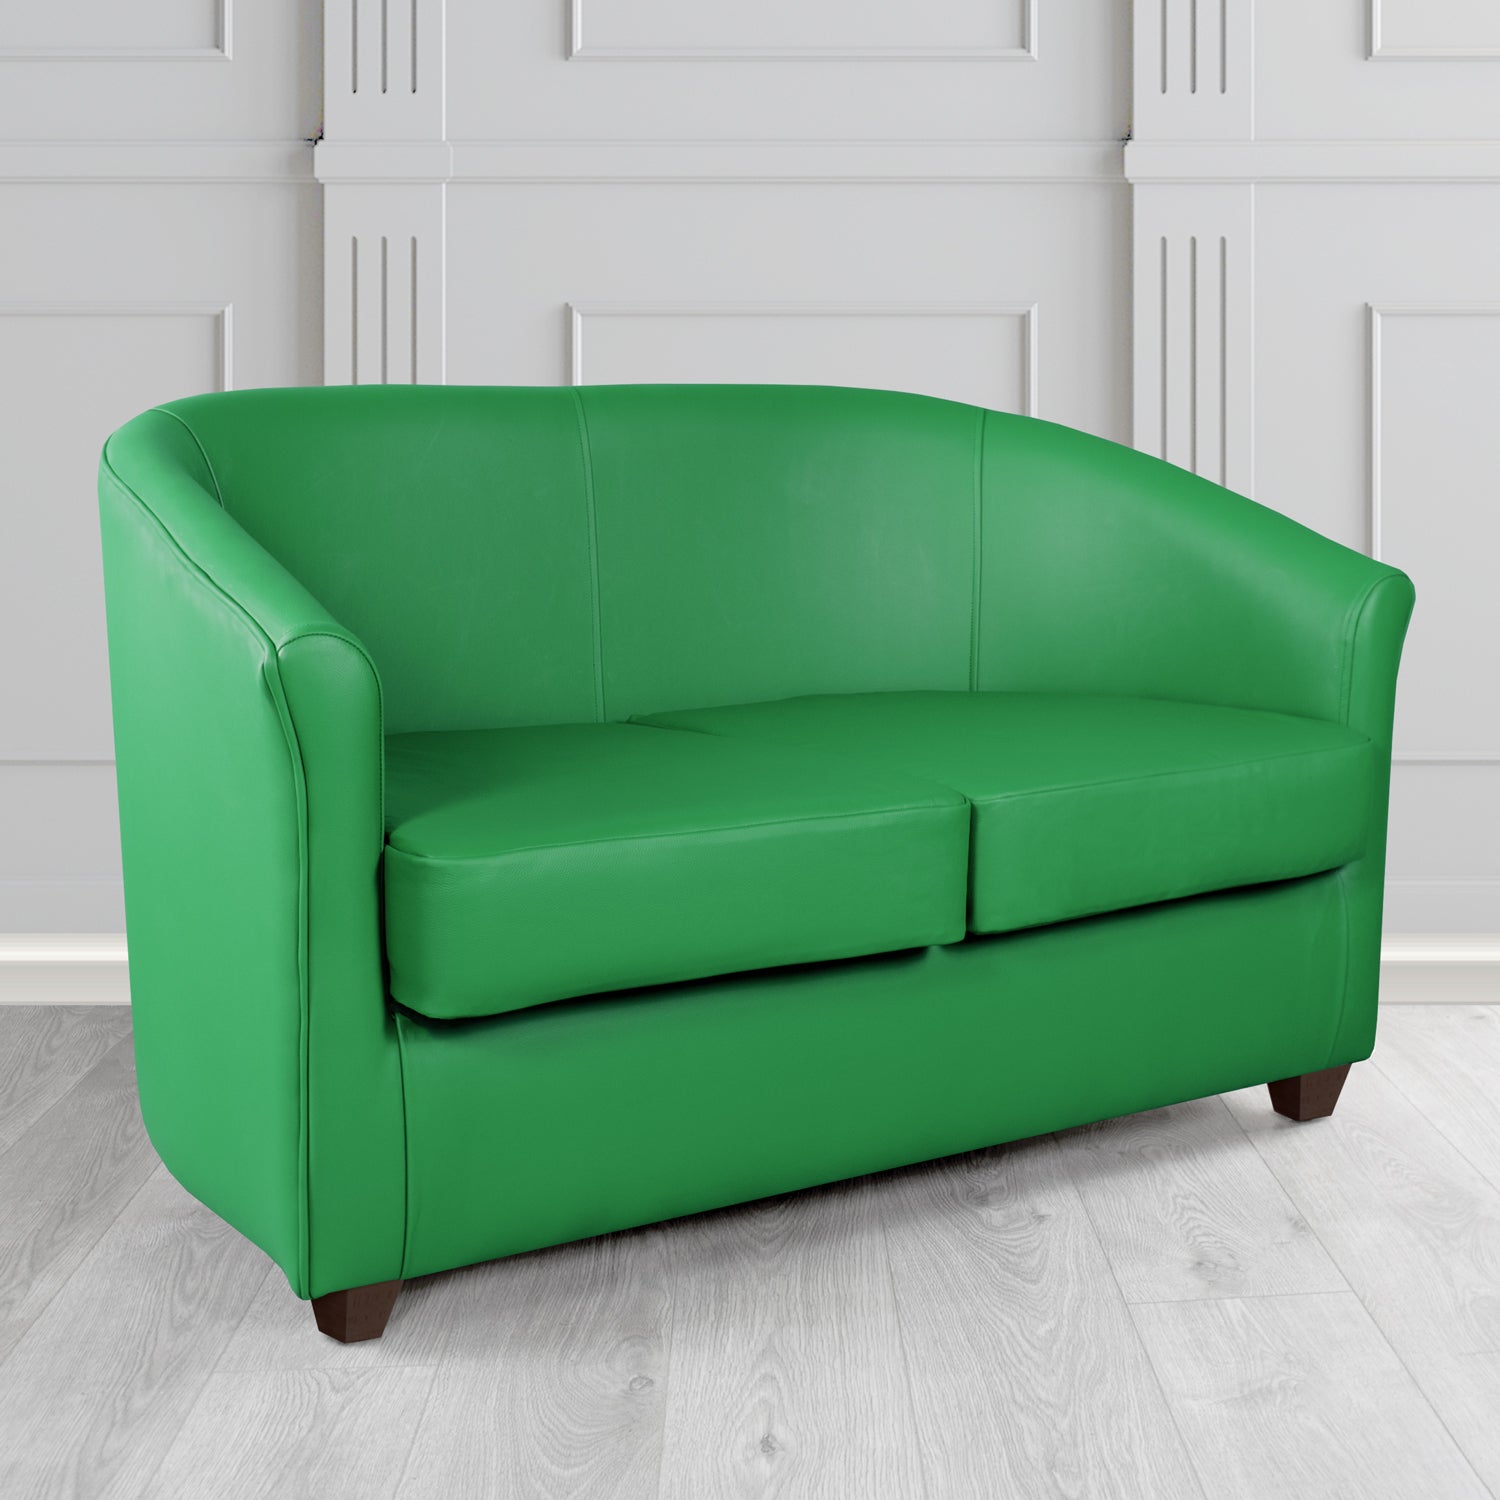 Cannes 2 Seater Tub Sofa in Just Colour Eden Crib 5 Faux Leather - The Tub Chair Shop